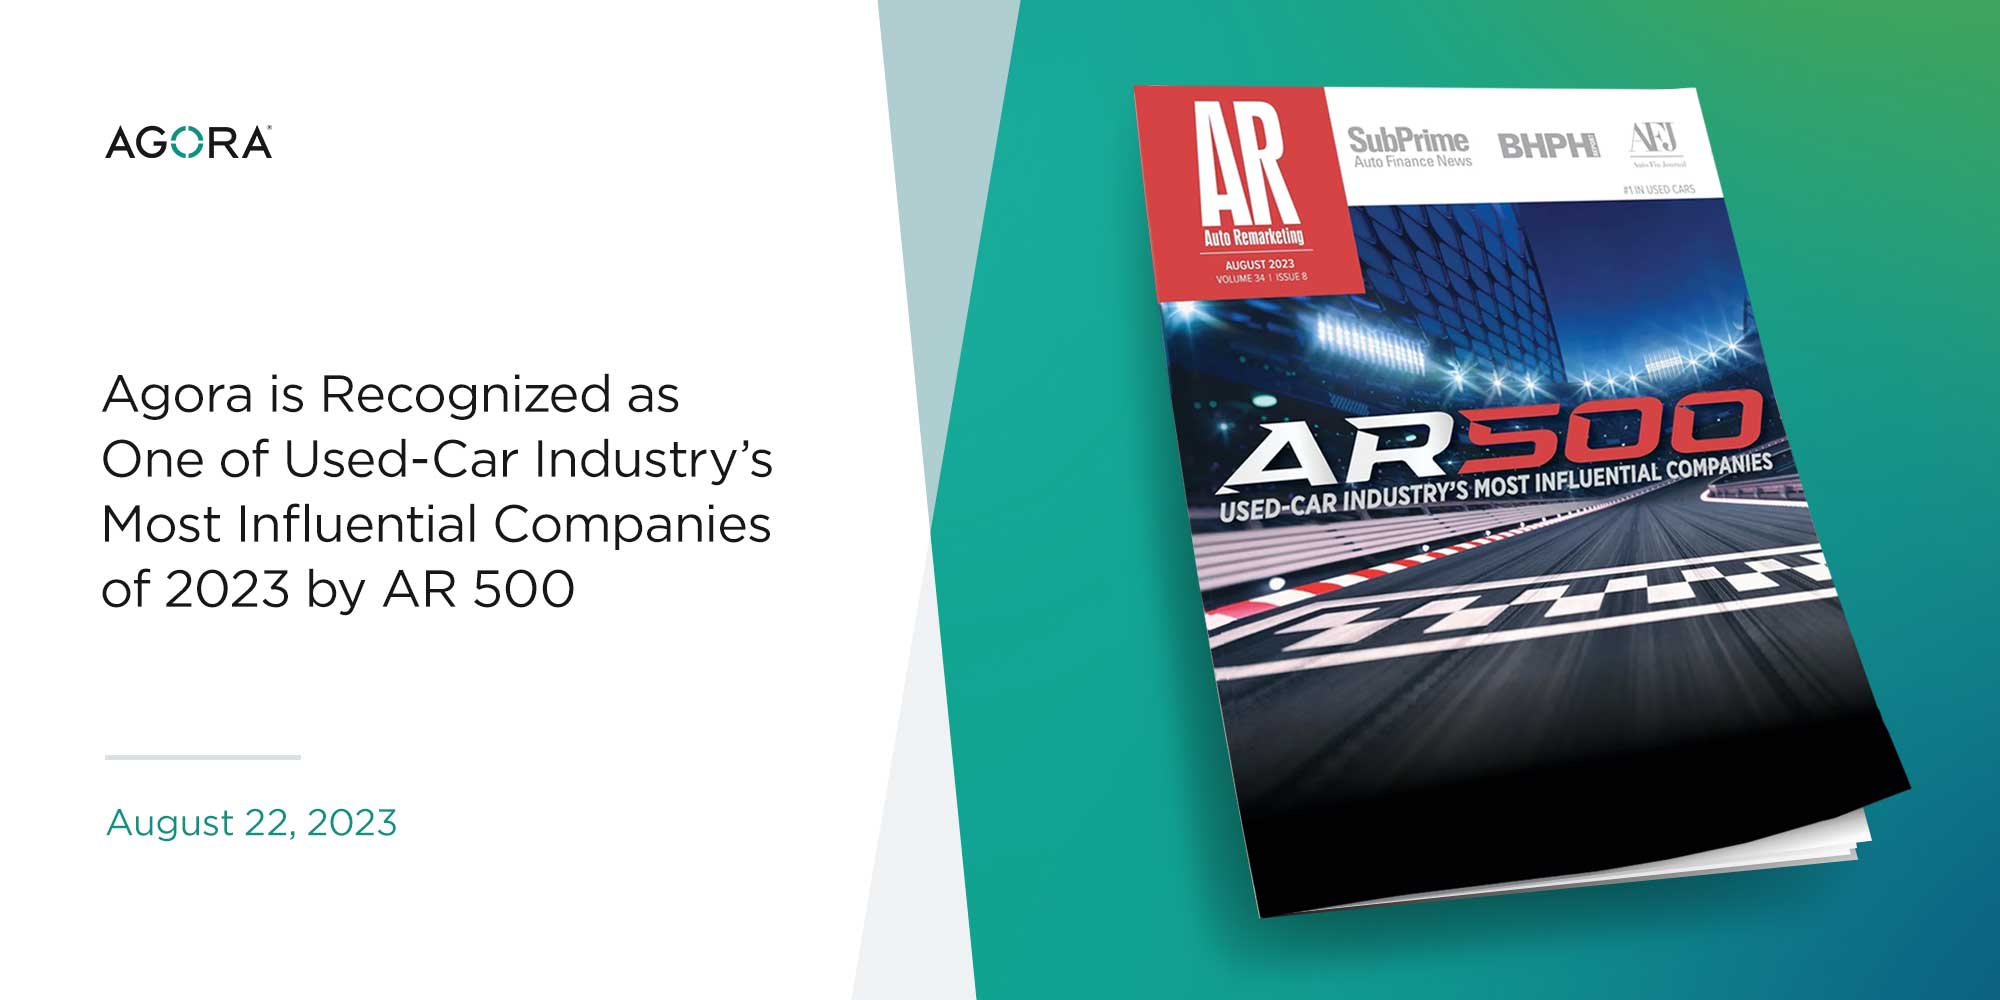 Agora is Recognized as One of Used-Car Industry’s Most Influential Companies of 2023 by AR 500